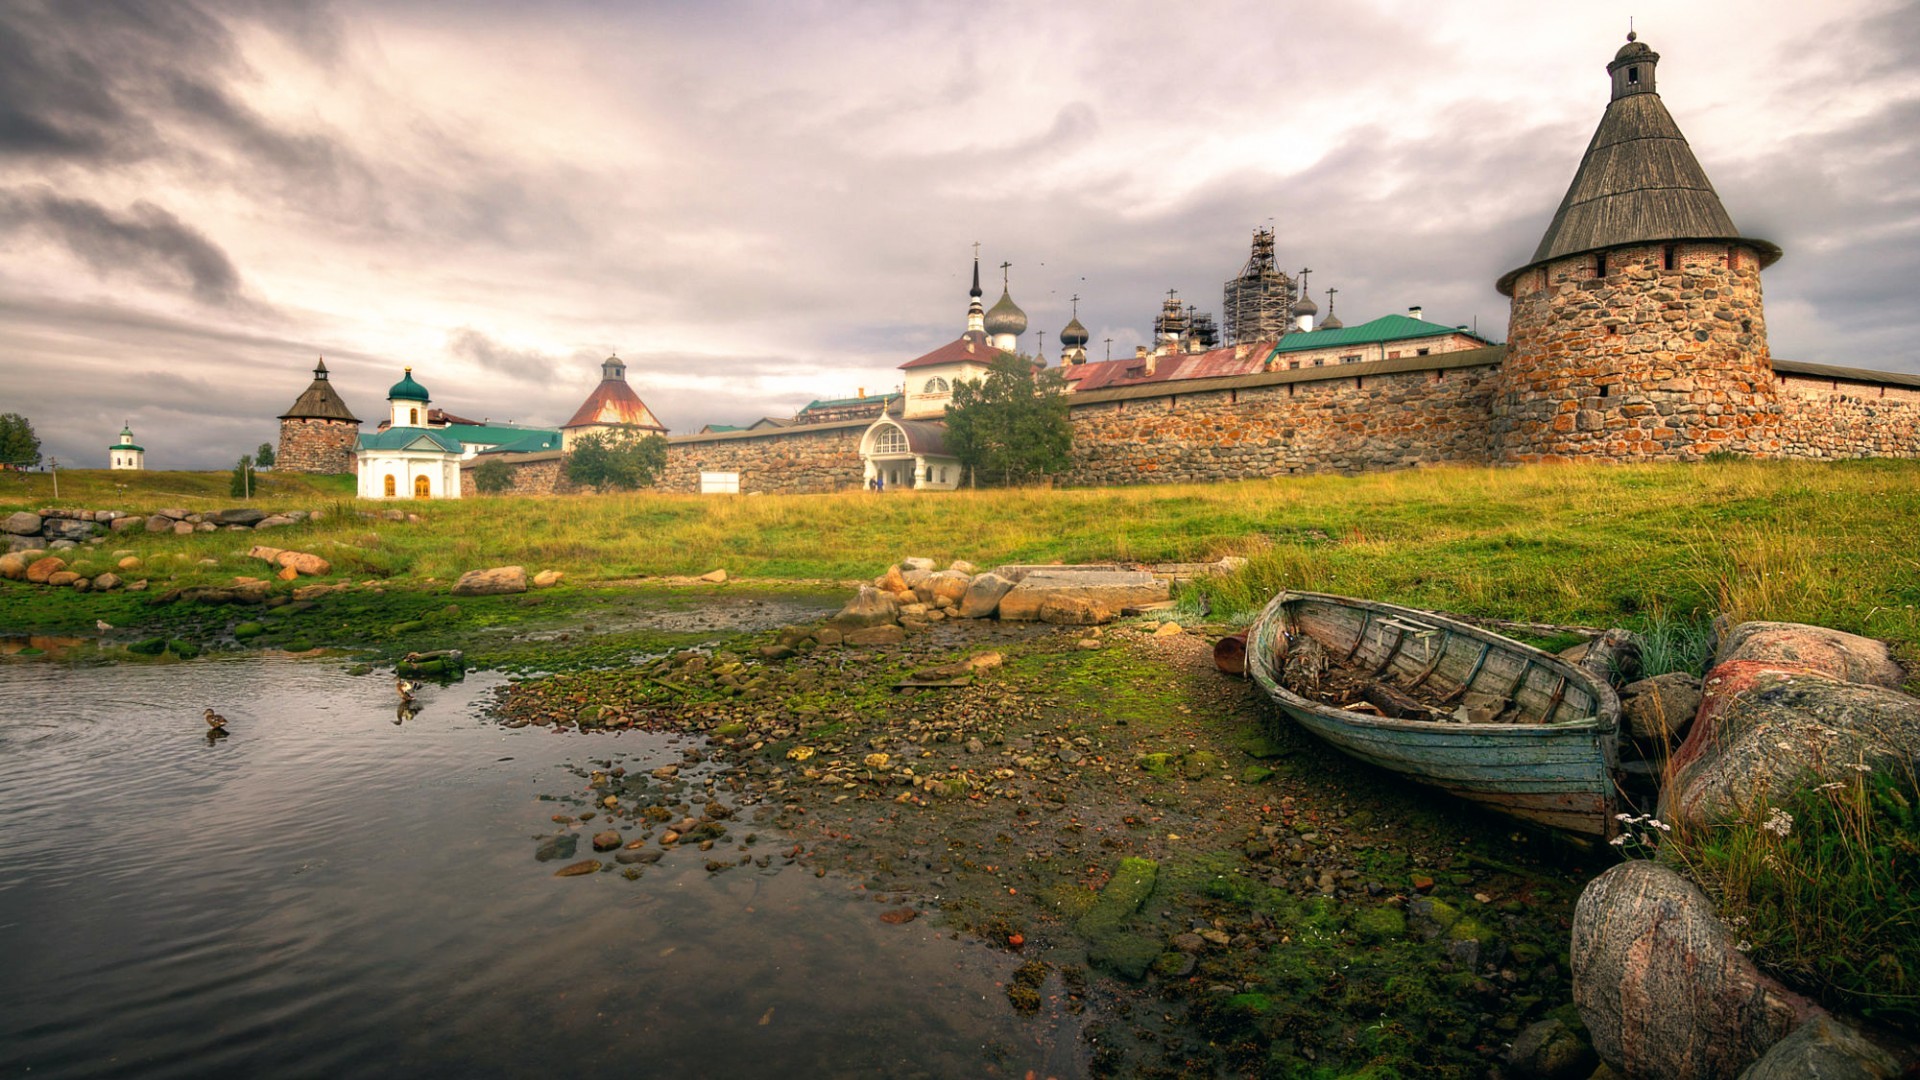 architecture, Landscape, Castle, Nature, Clouds, Russia, Boat, Lake, Stones, Tower, Church, Cross, Grass, Trees Wallpaper